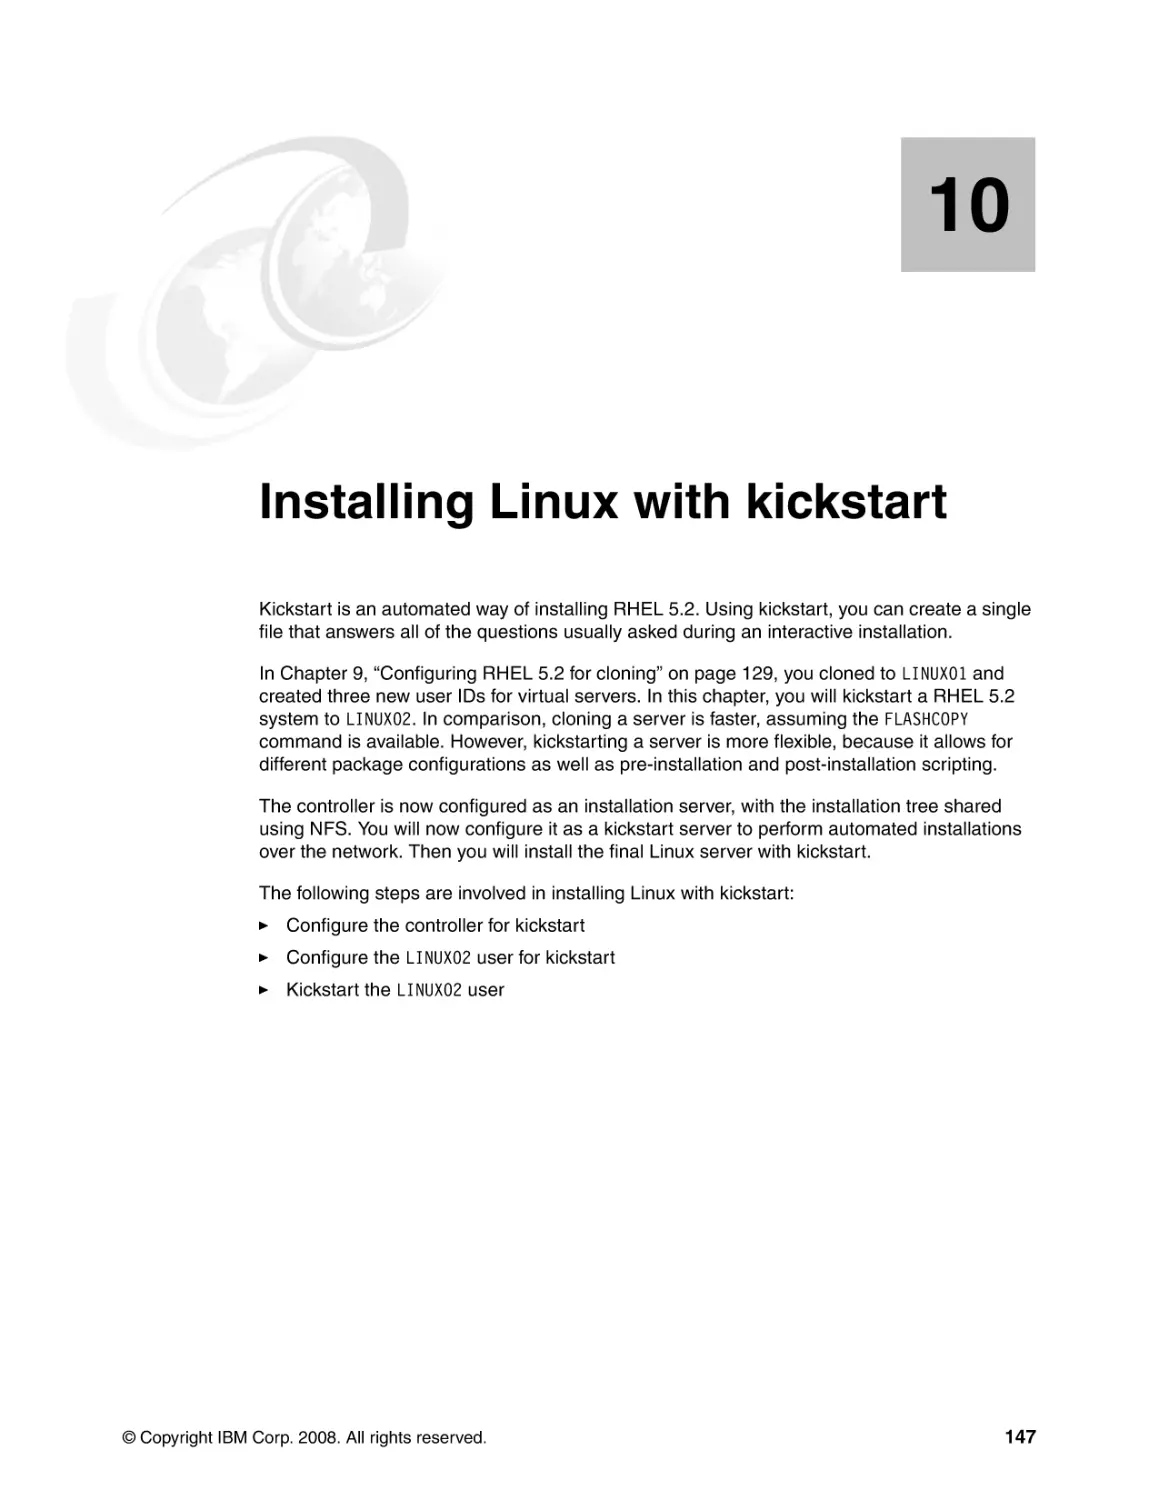 Chapter 10. Installing Linux with kickstart